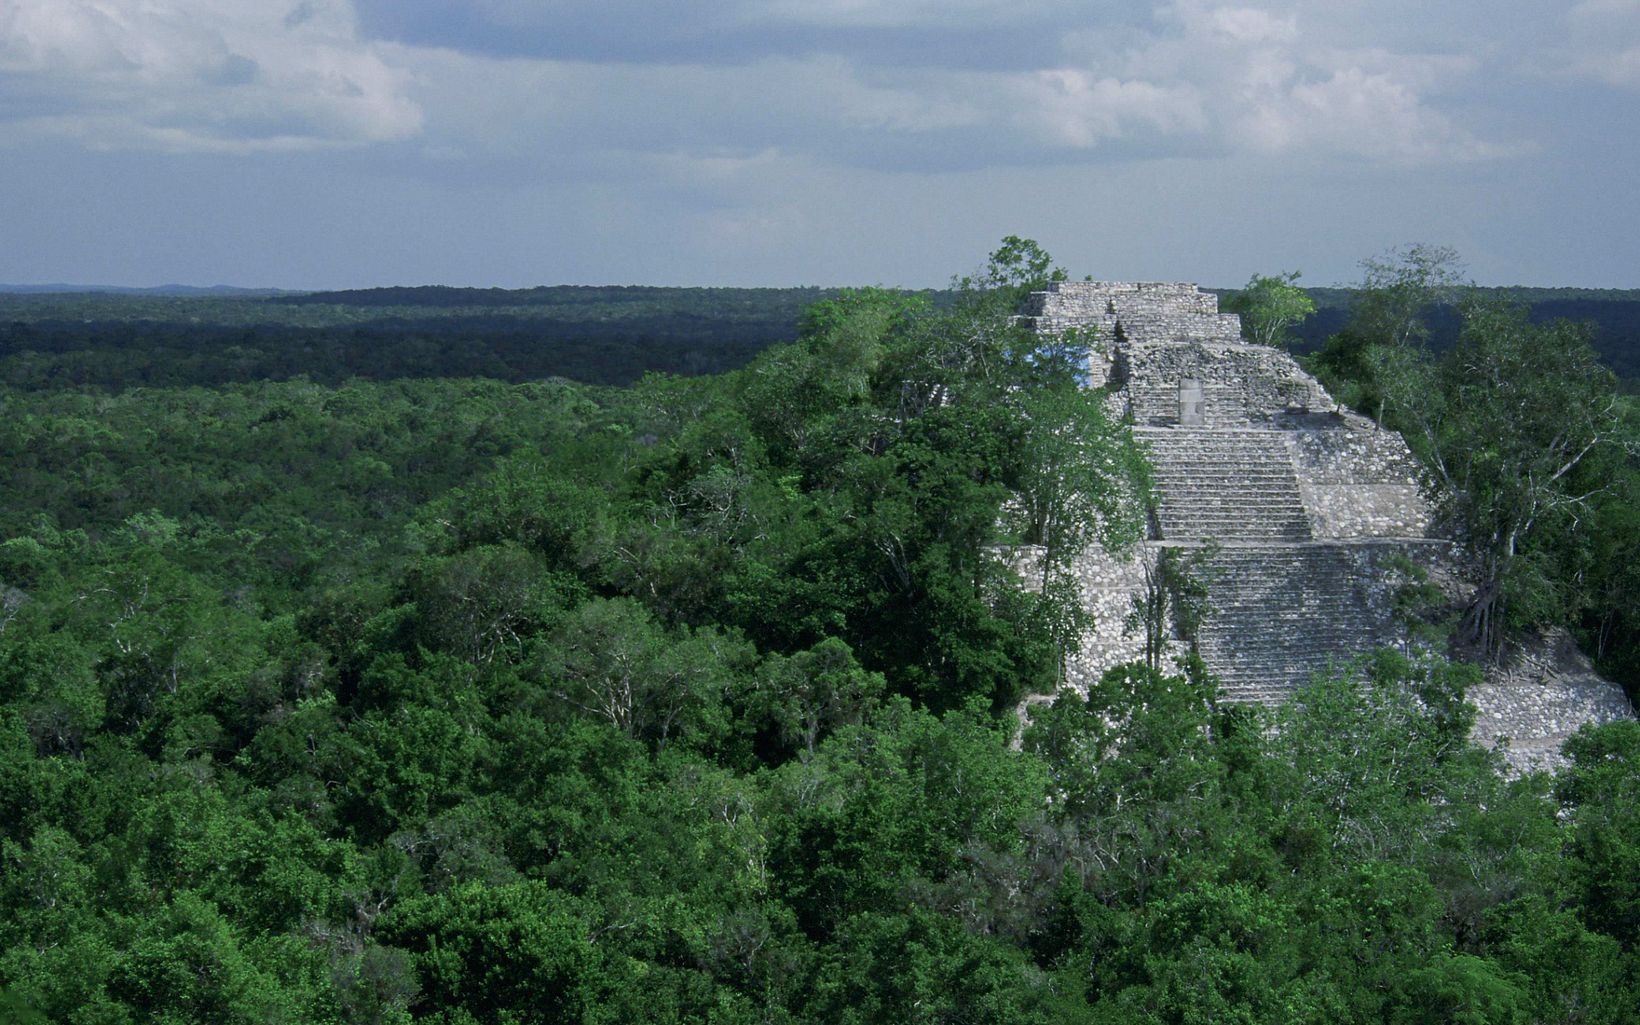 Partially restored Maya temple ruins rise above the Maya forest canopy in Mexico's Calakmul Biosphere Reserve